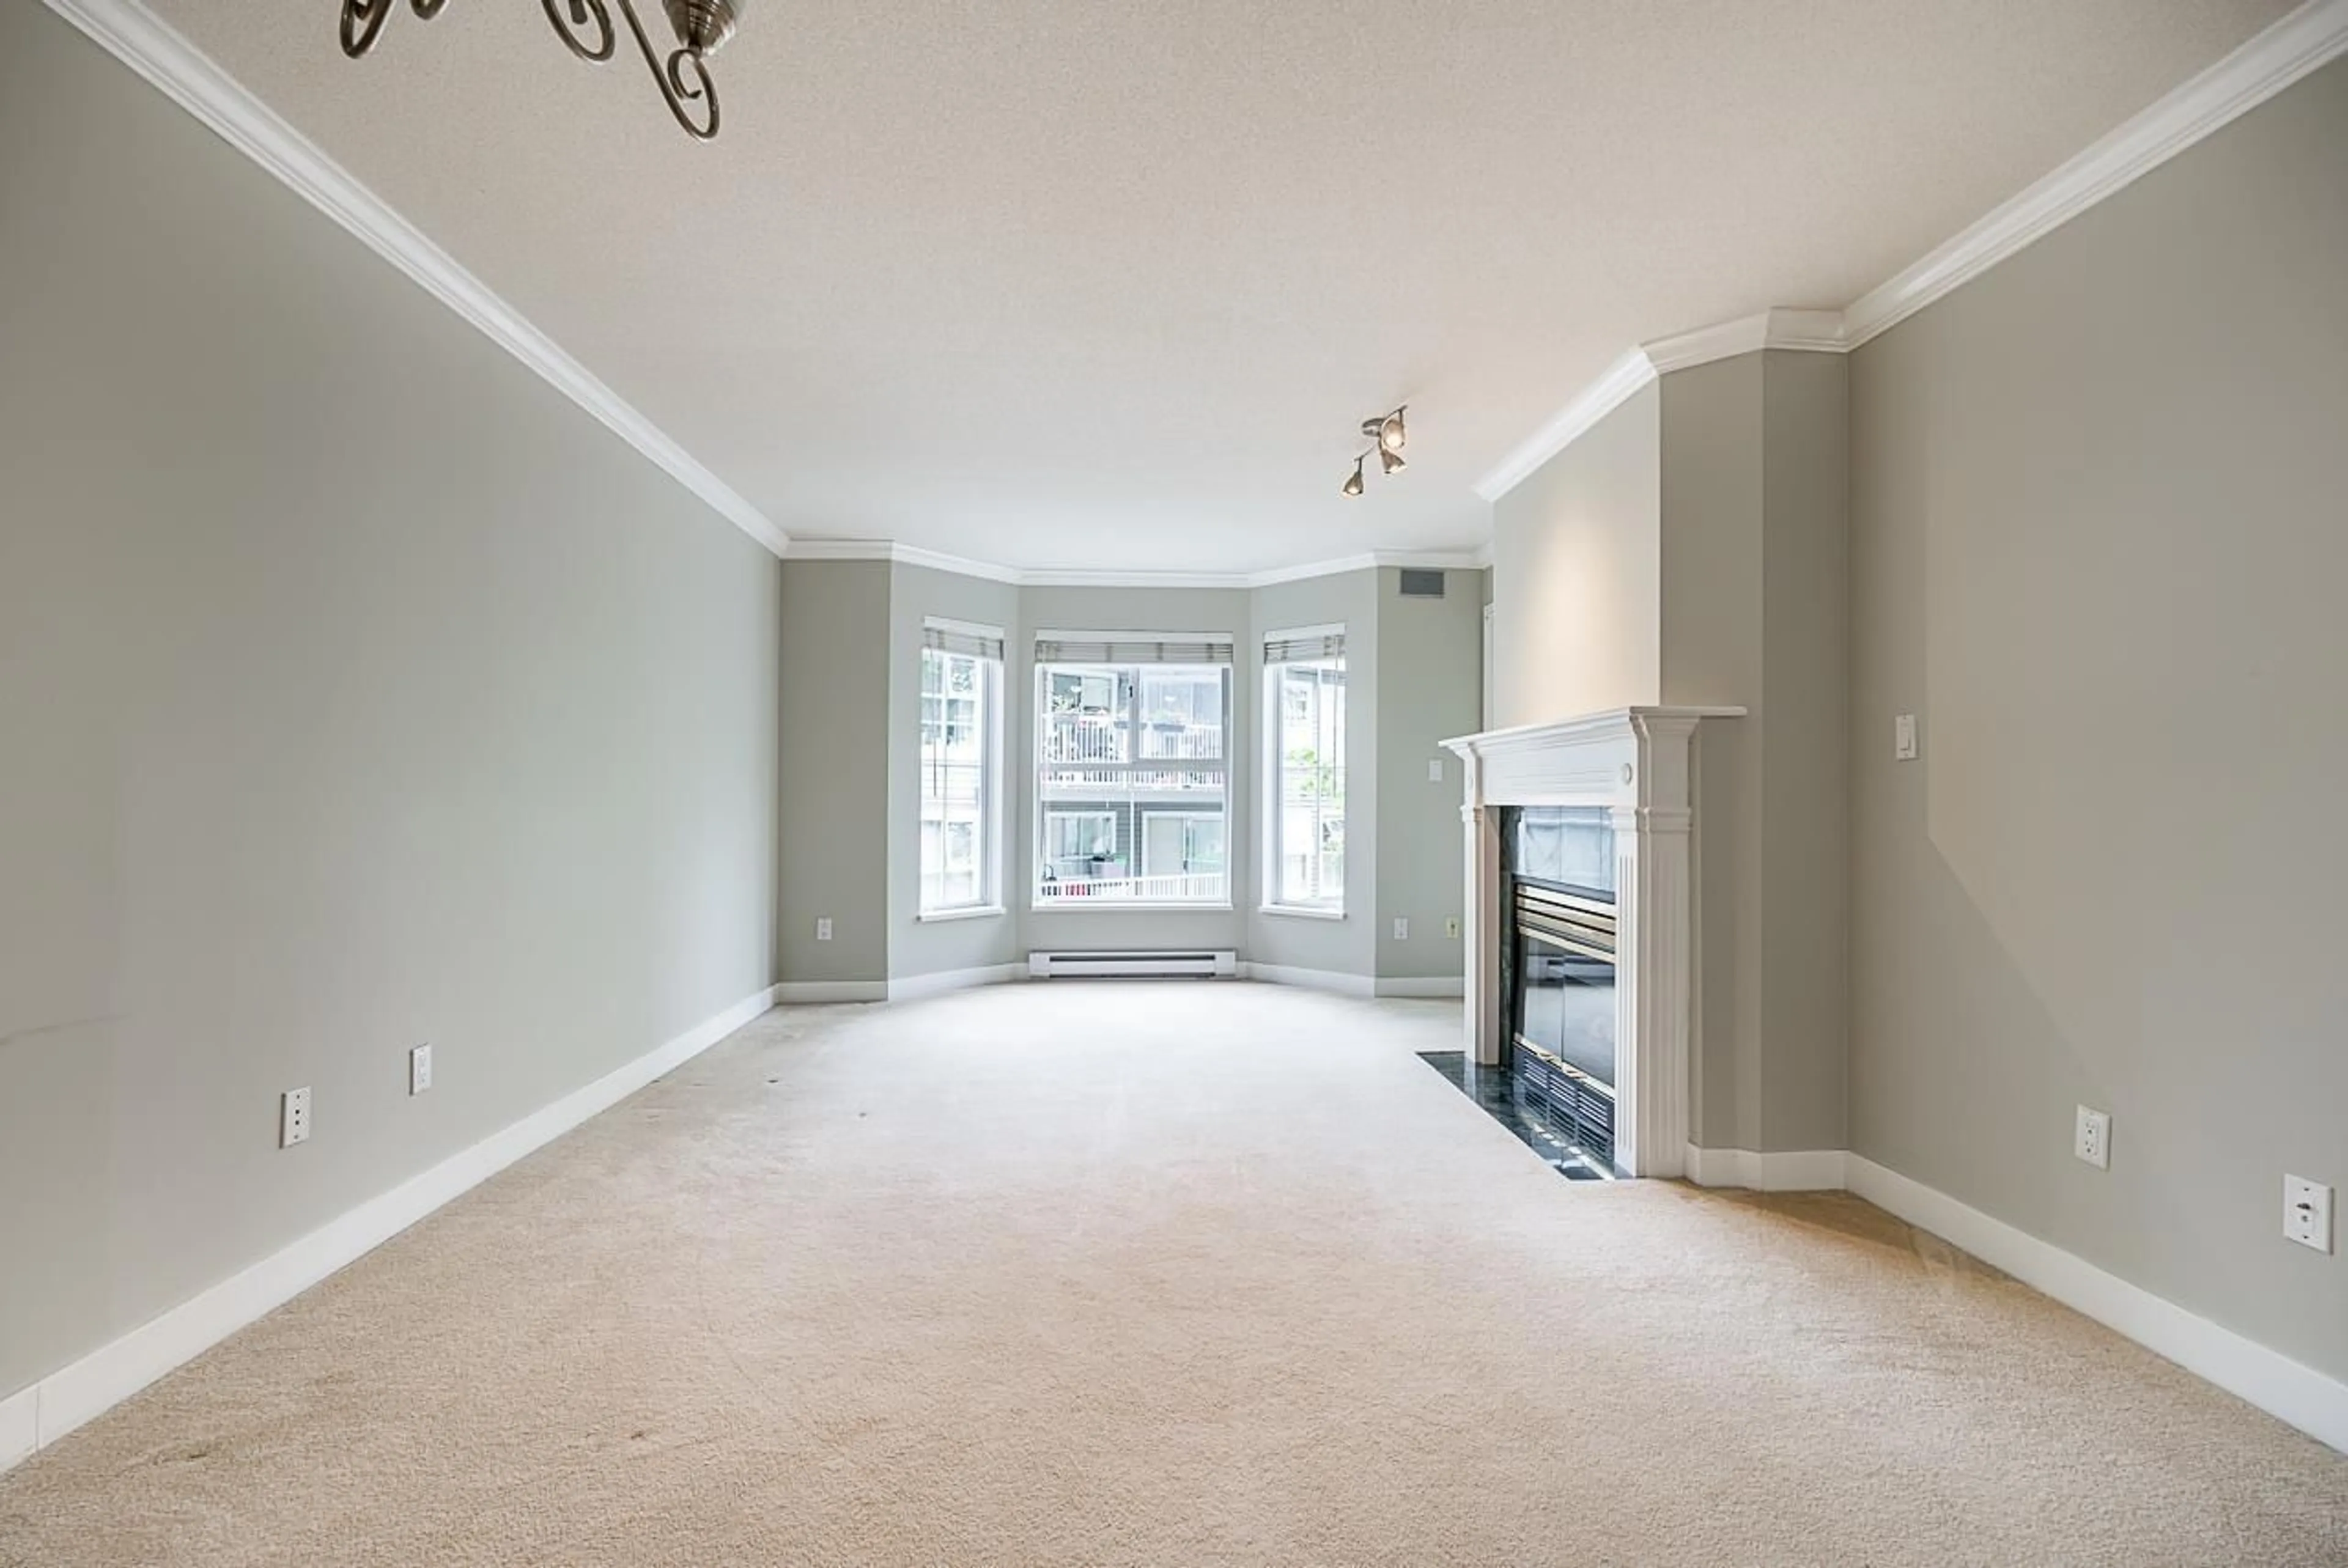 A pic of a room for 203 15130 108 AVENUE, Surrey British Columbia V3R0T8